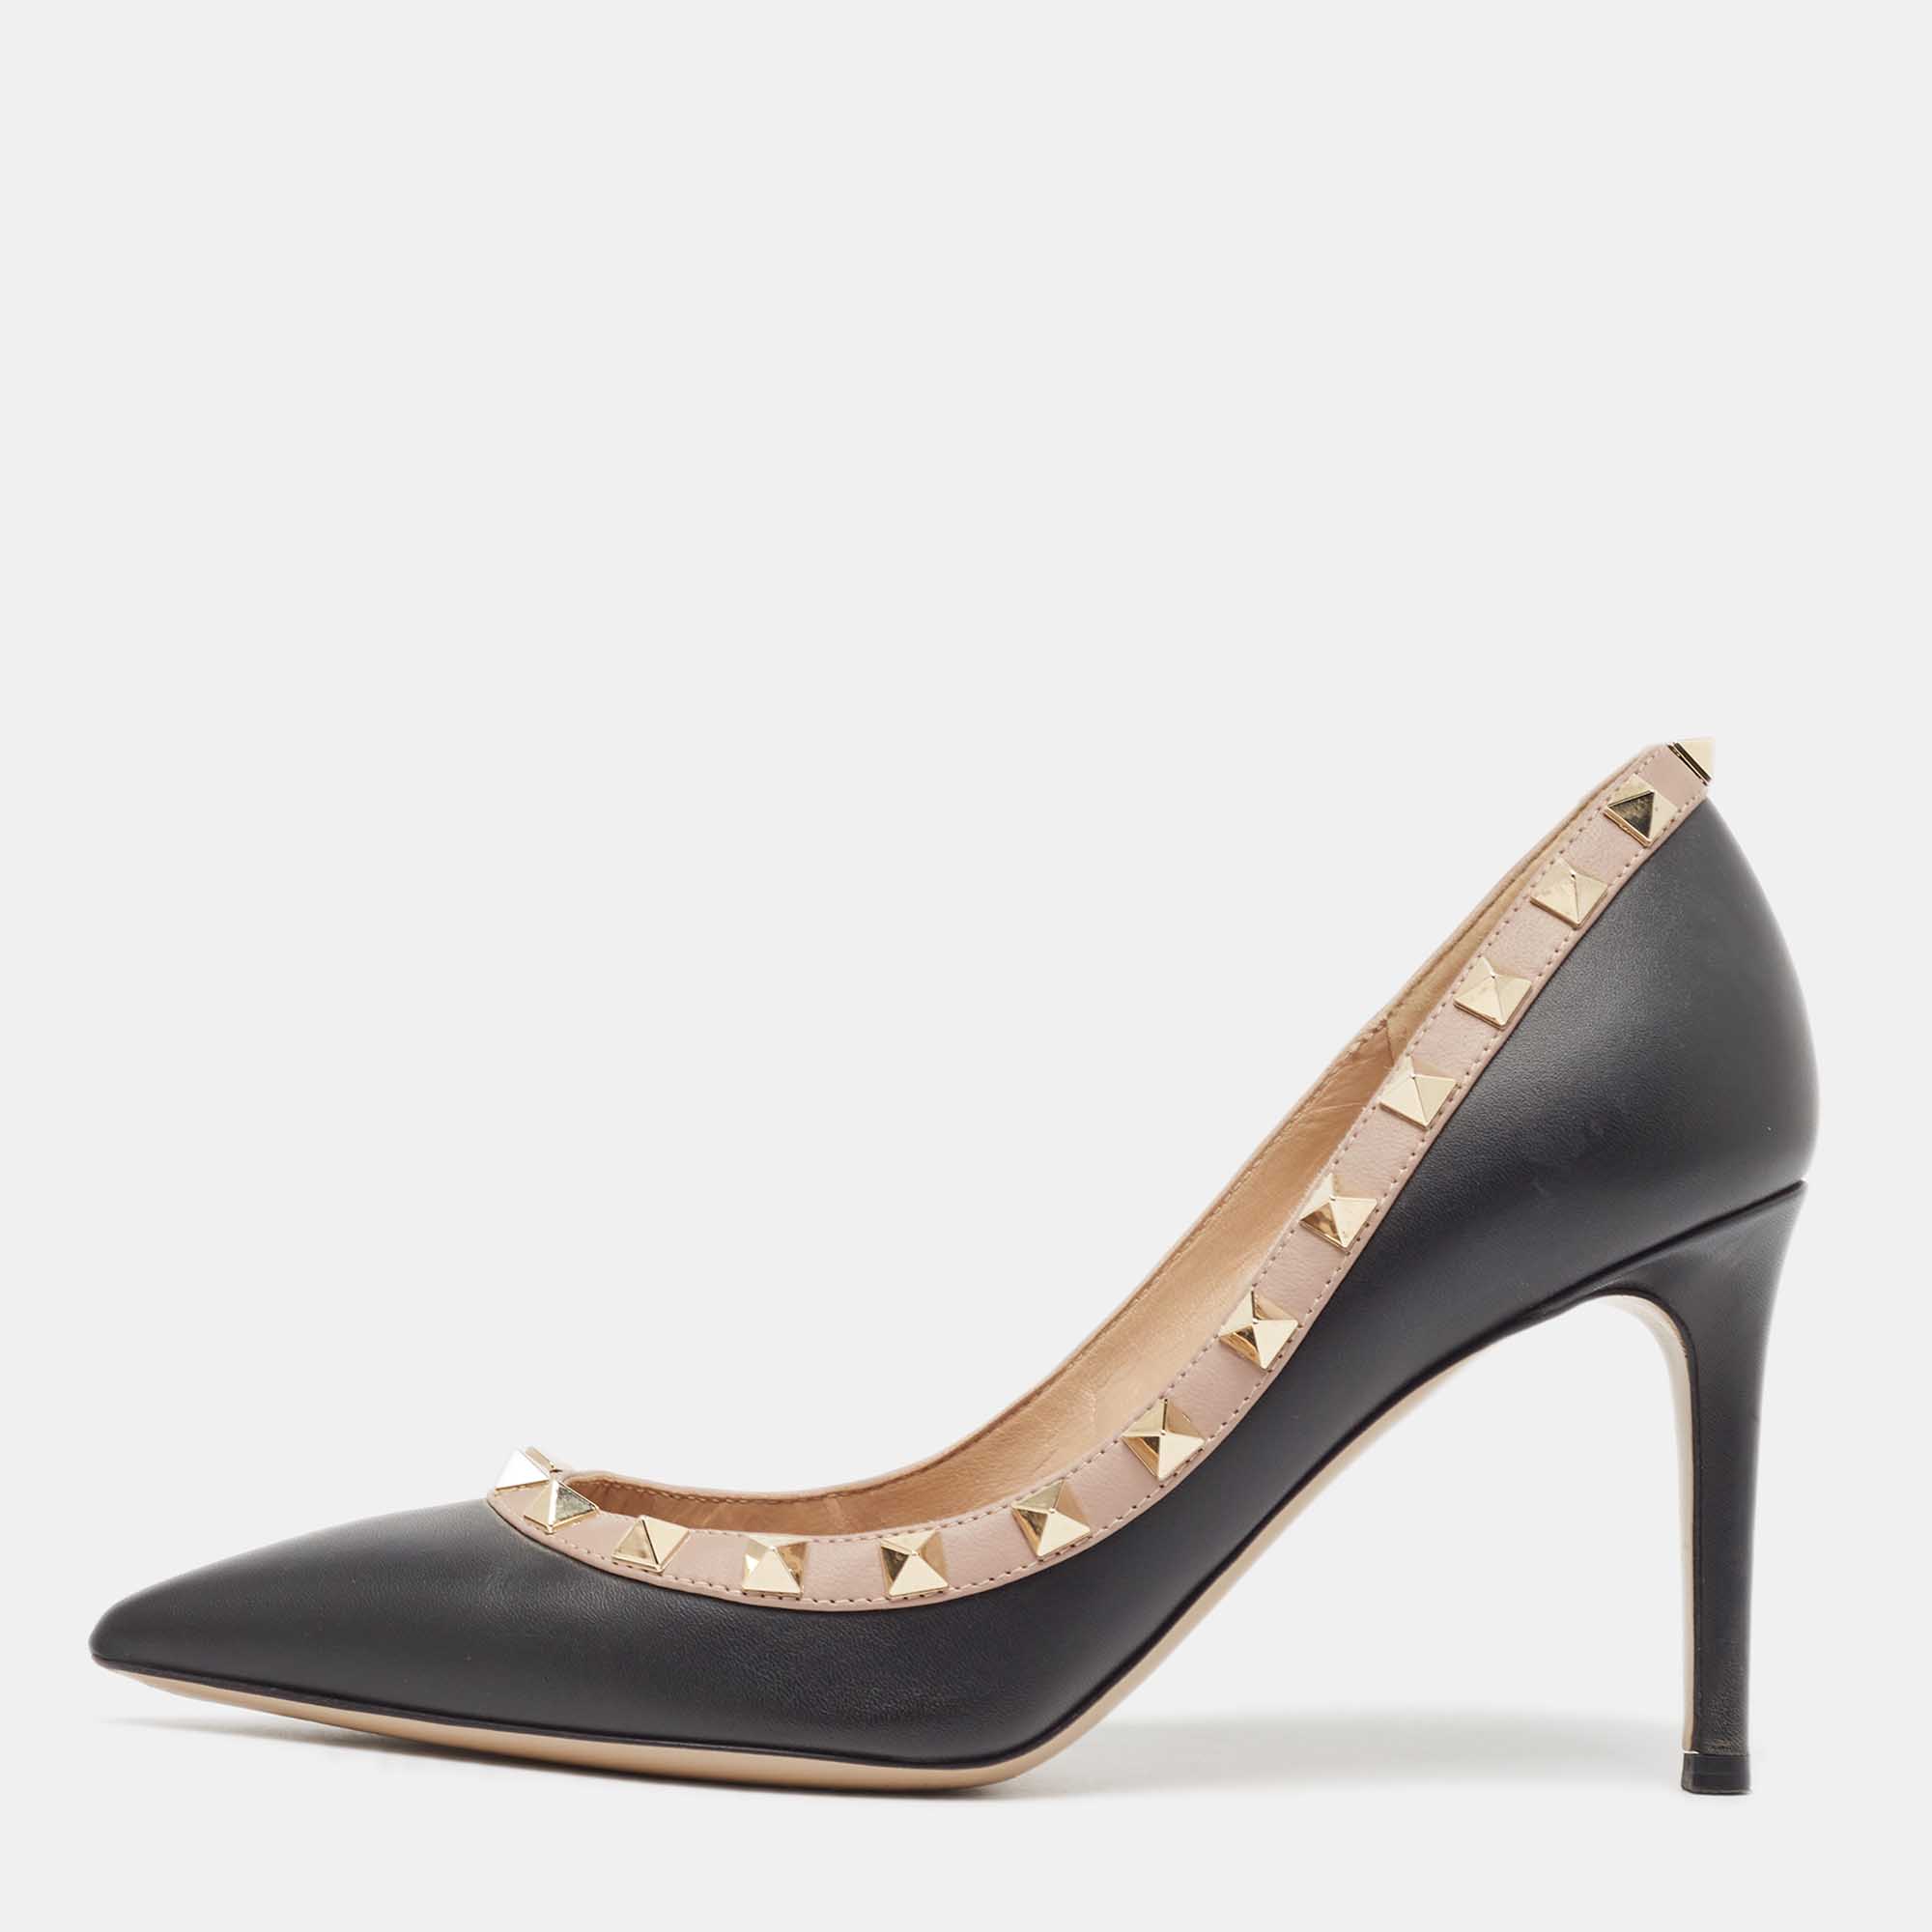 Valentino black leather rockstud pointed toe pumps size 36